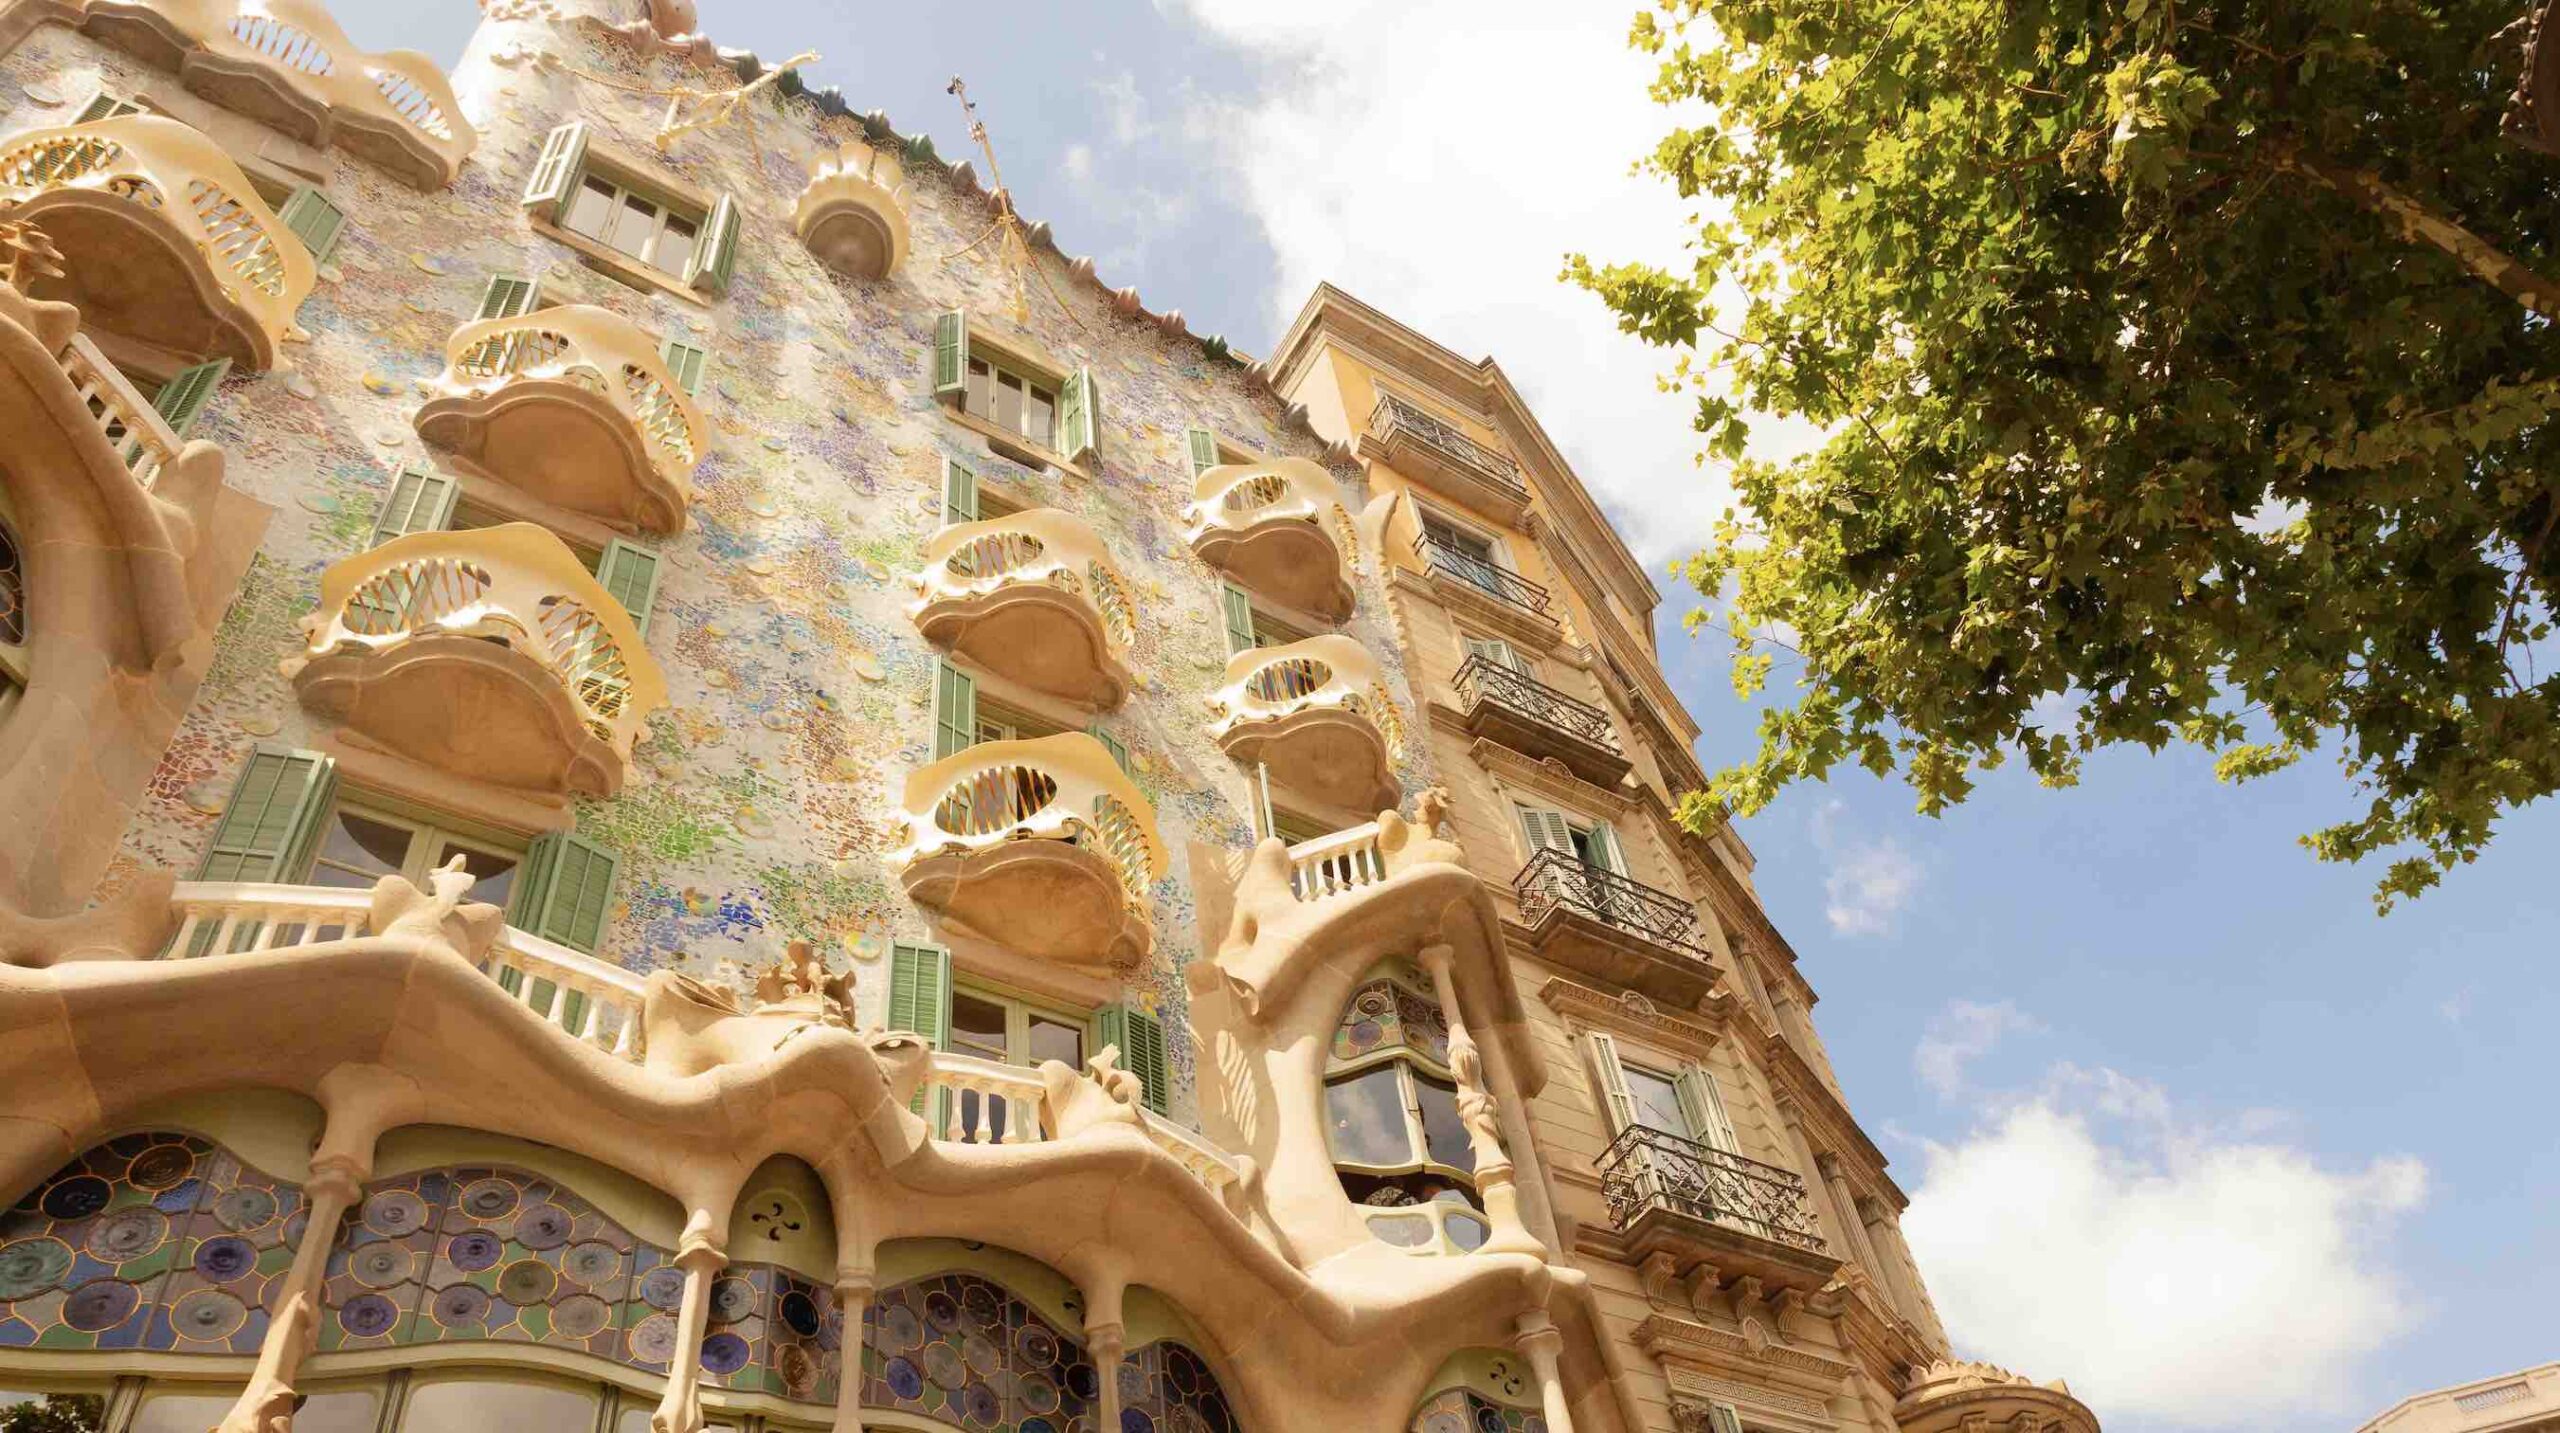 Best things to do in Barcelona include visiting Casa Batlló exterior shown here